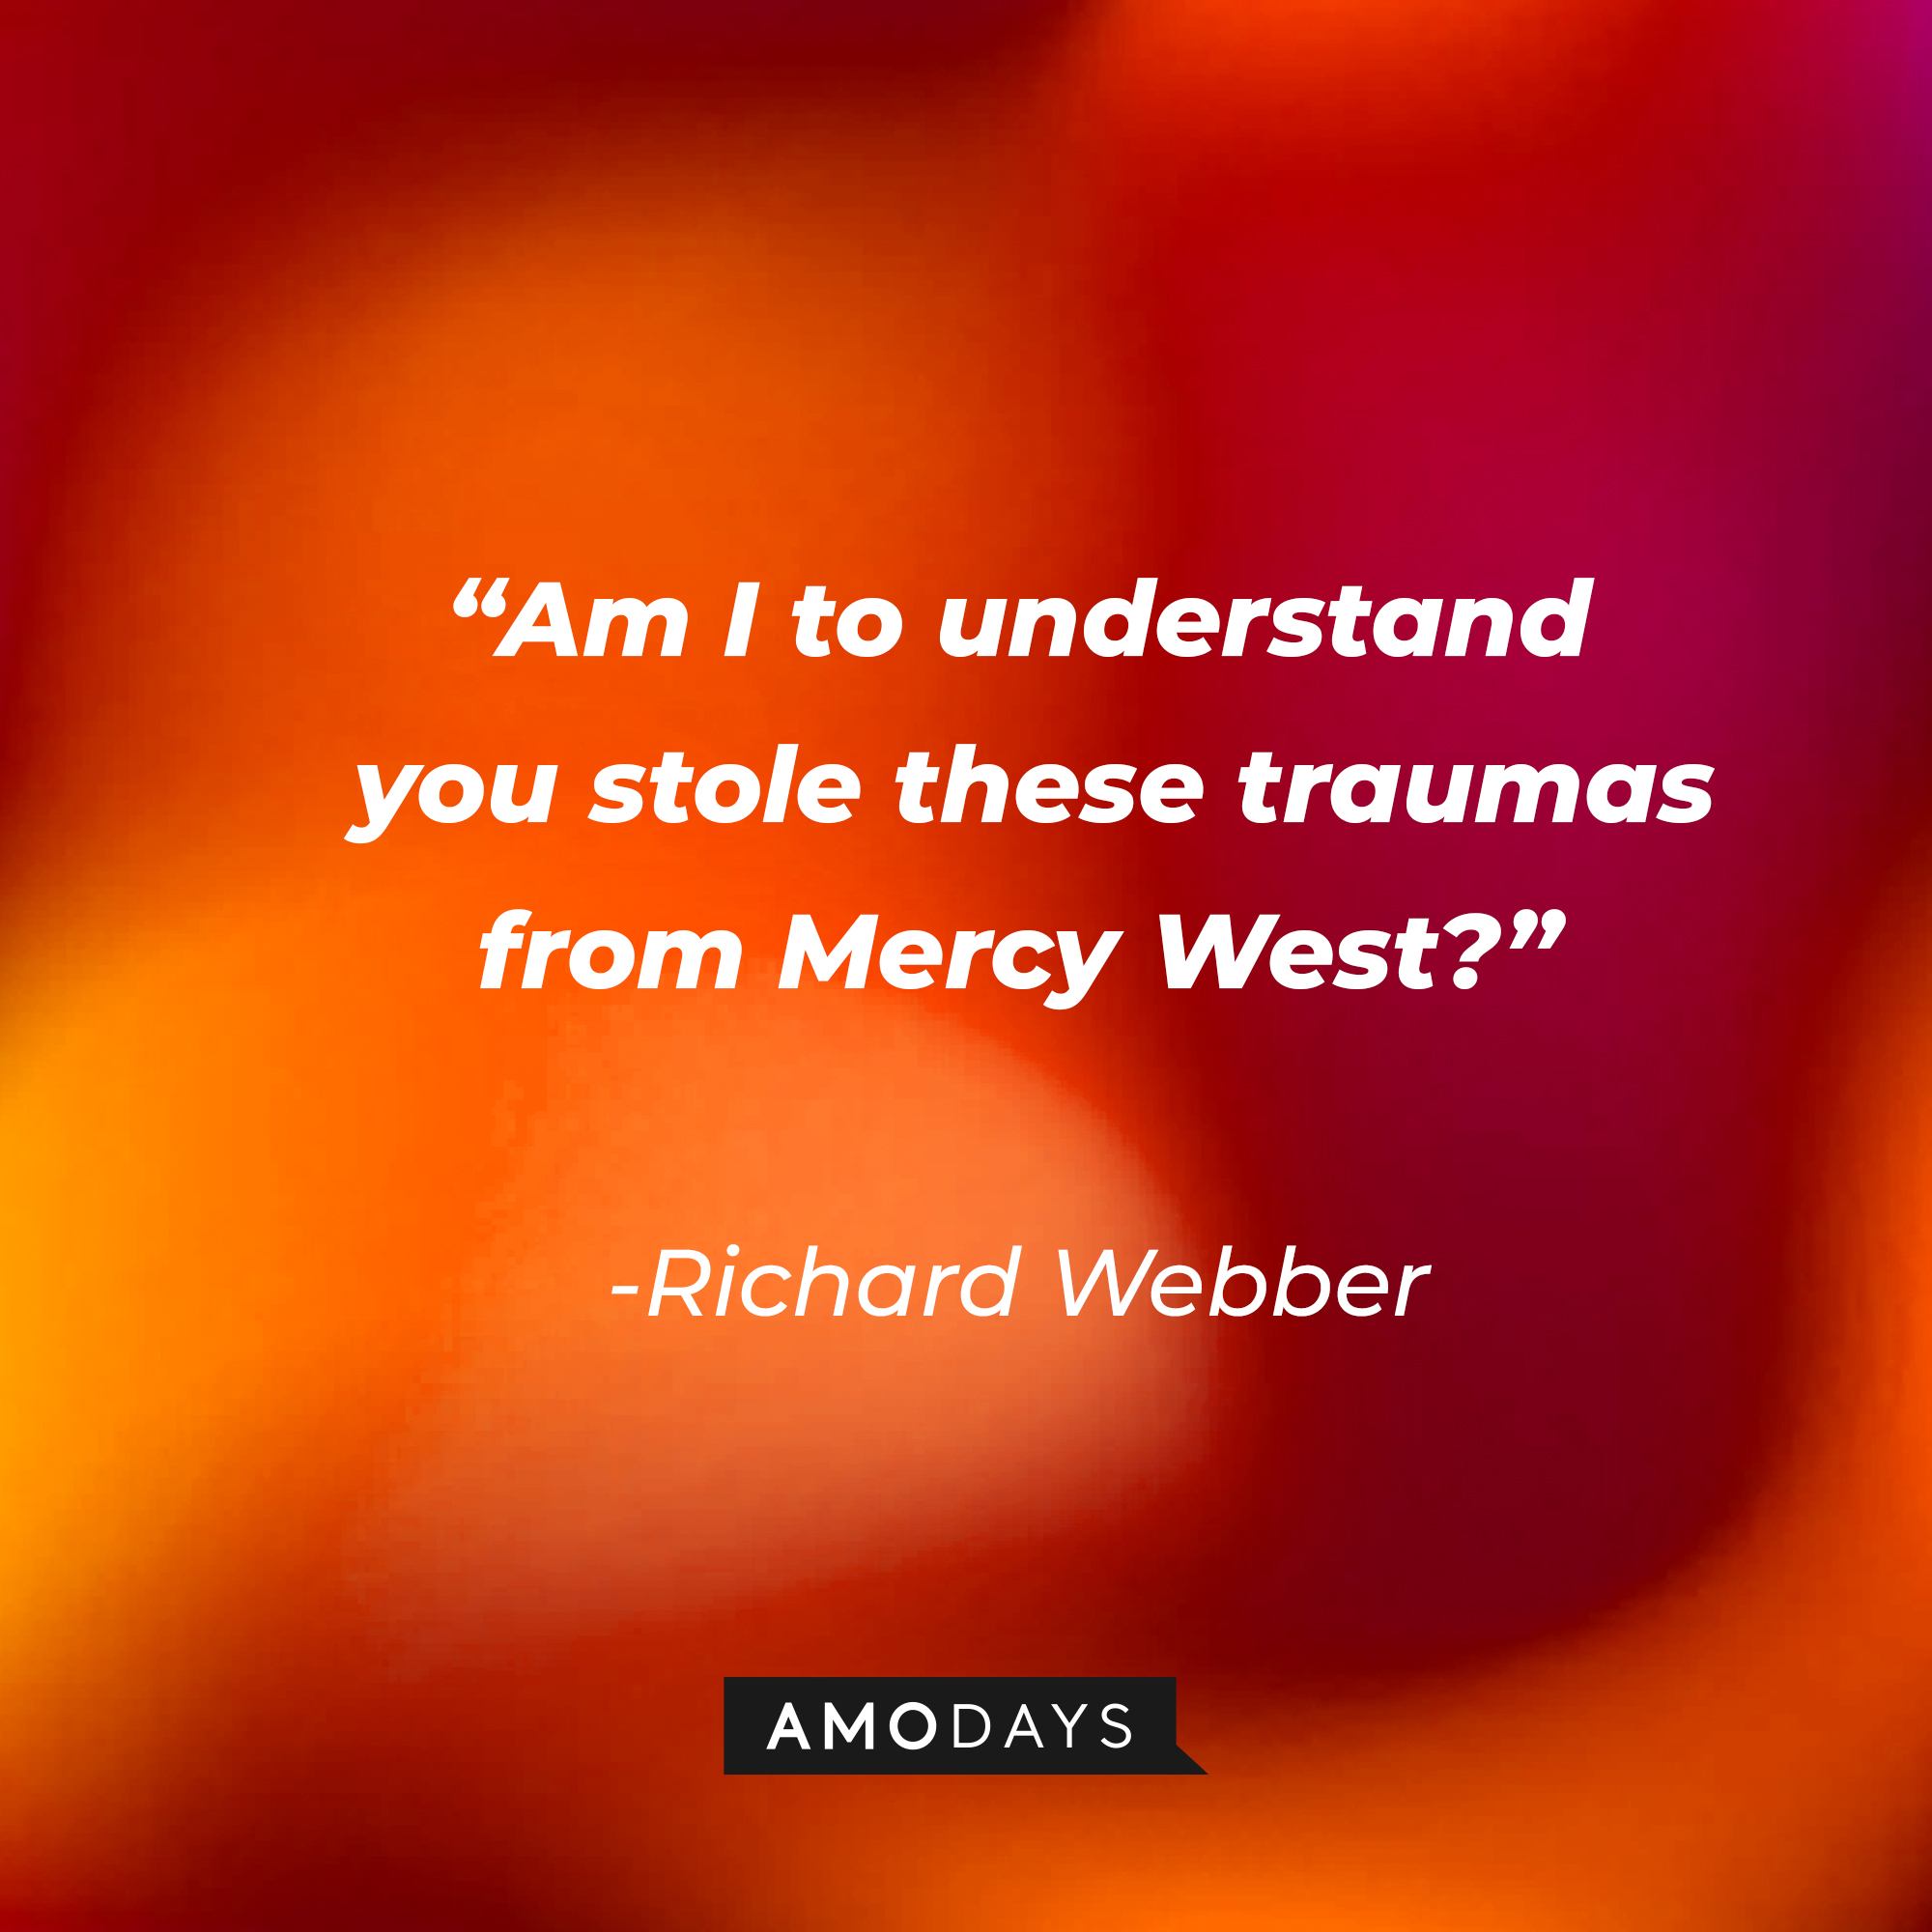 Richard Webber with his quote: "Am I to understand you stole these traumas from Mercy West?" | Source: Amodays